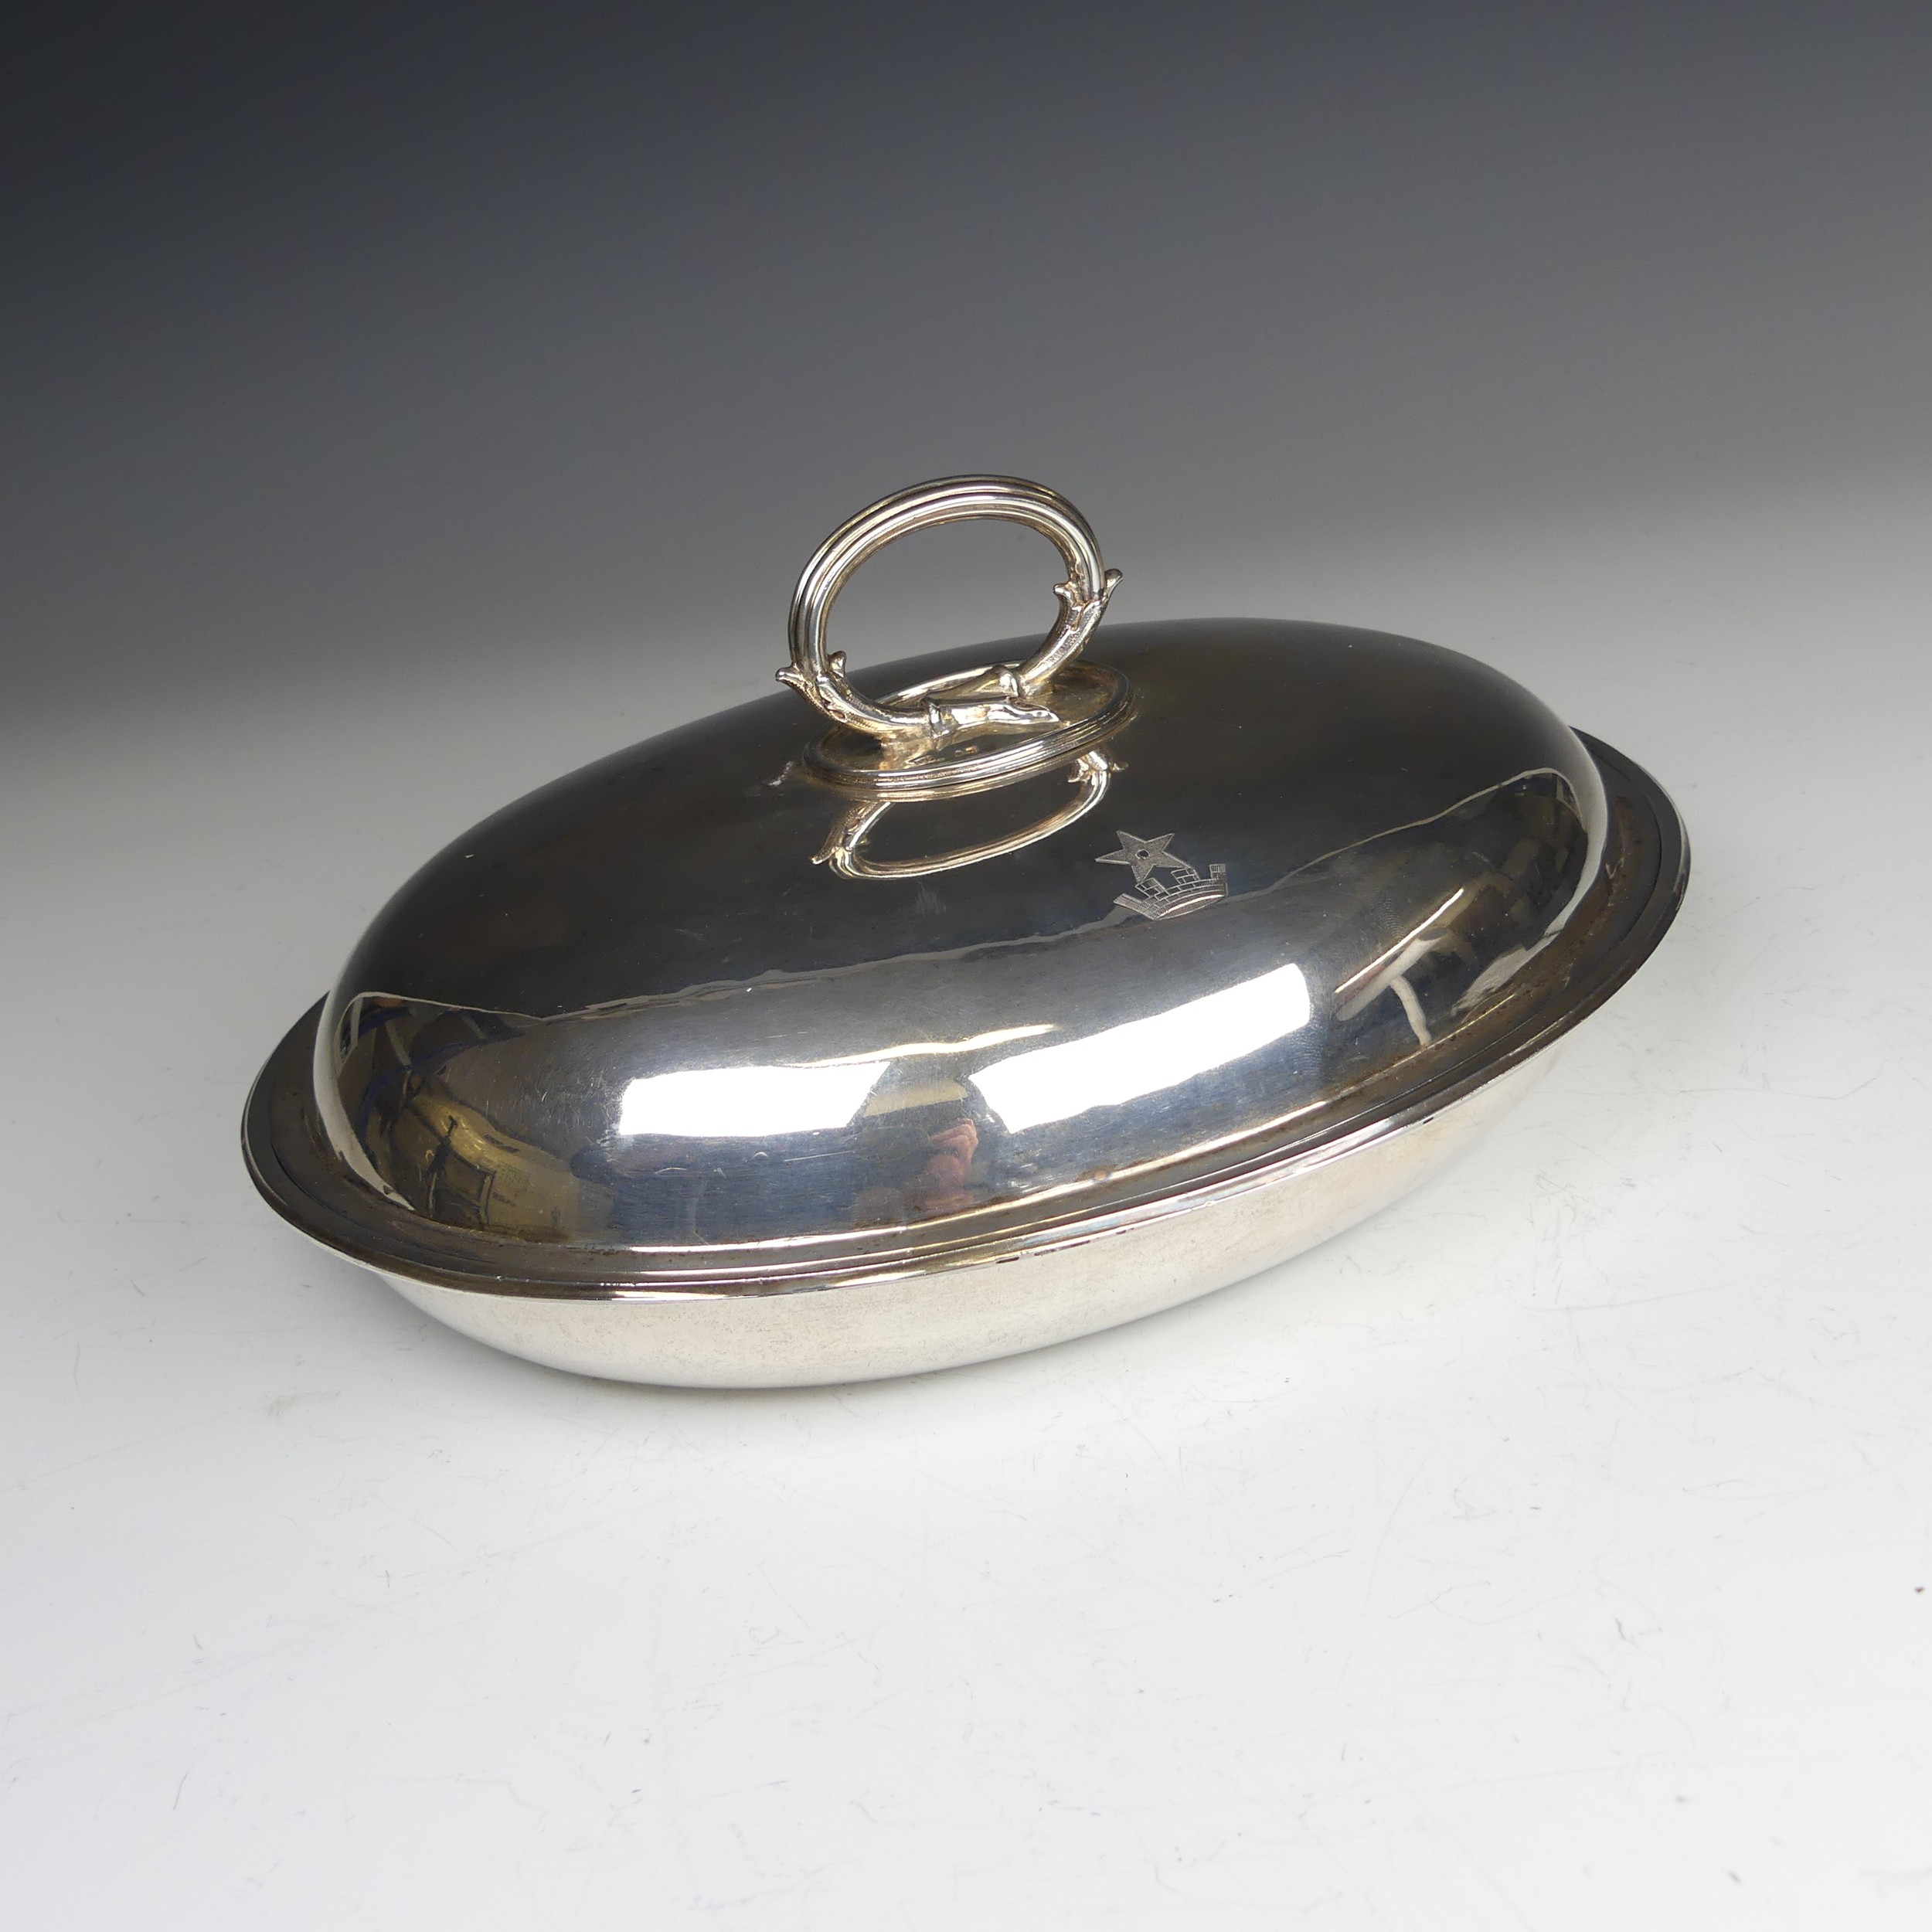 A Victorian oval silver Entrée Dish, hallmarked London 1883, with loop handle, crested with Peile - Image 2 of 9